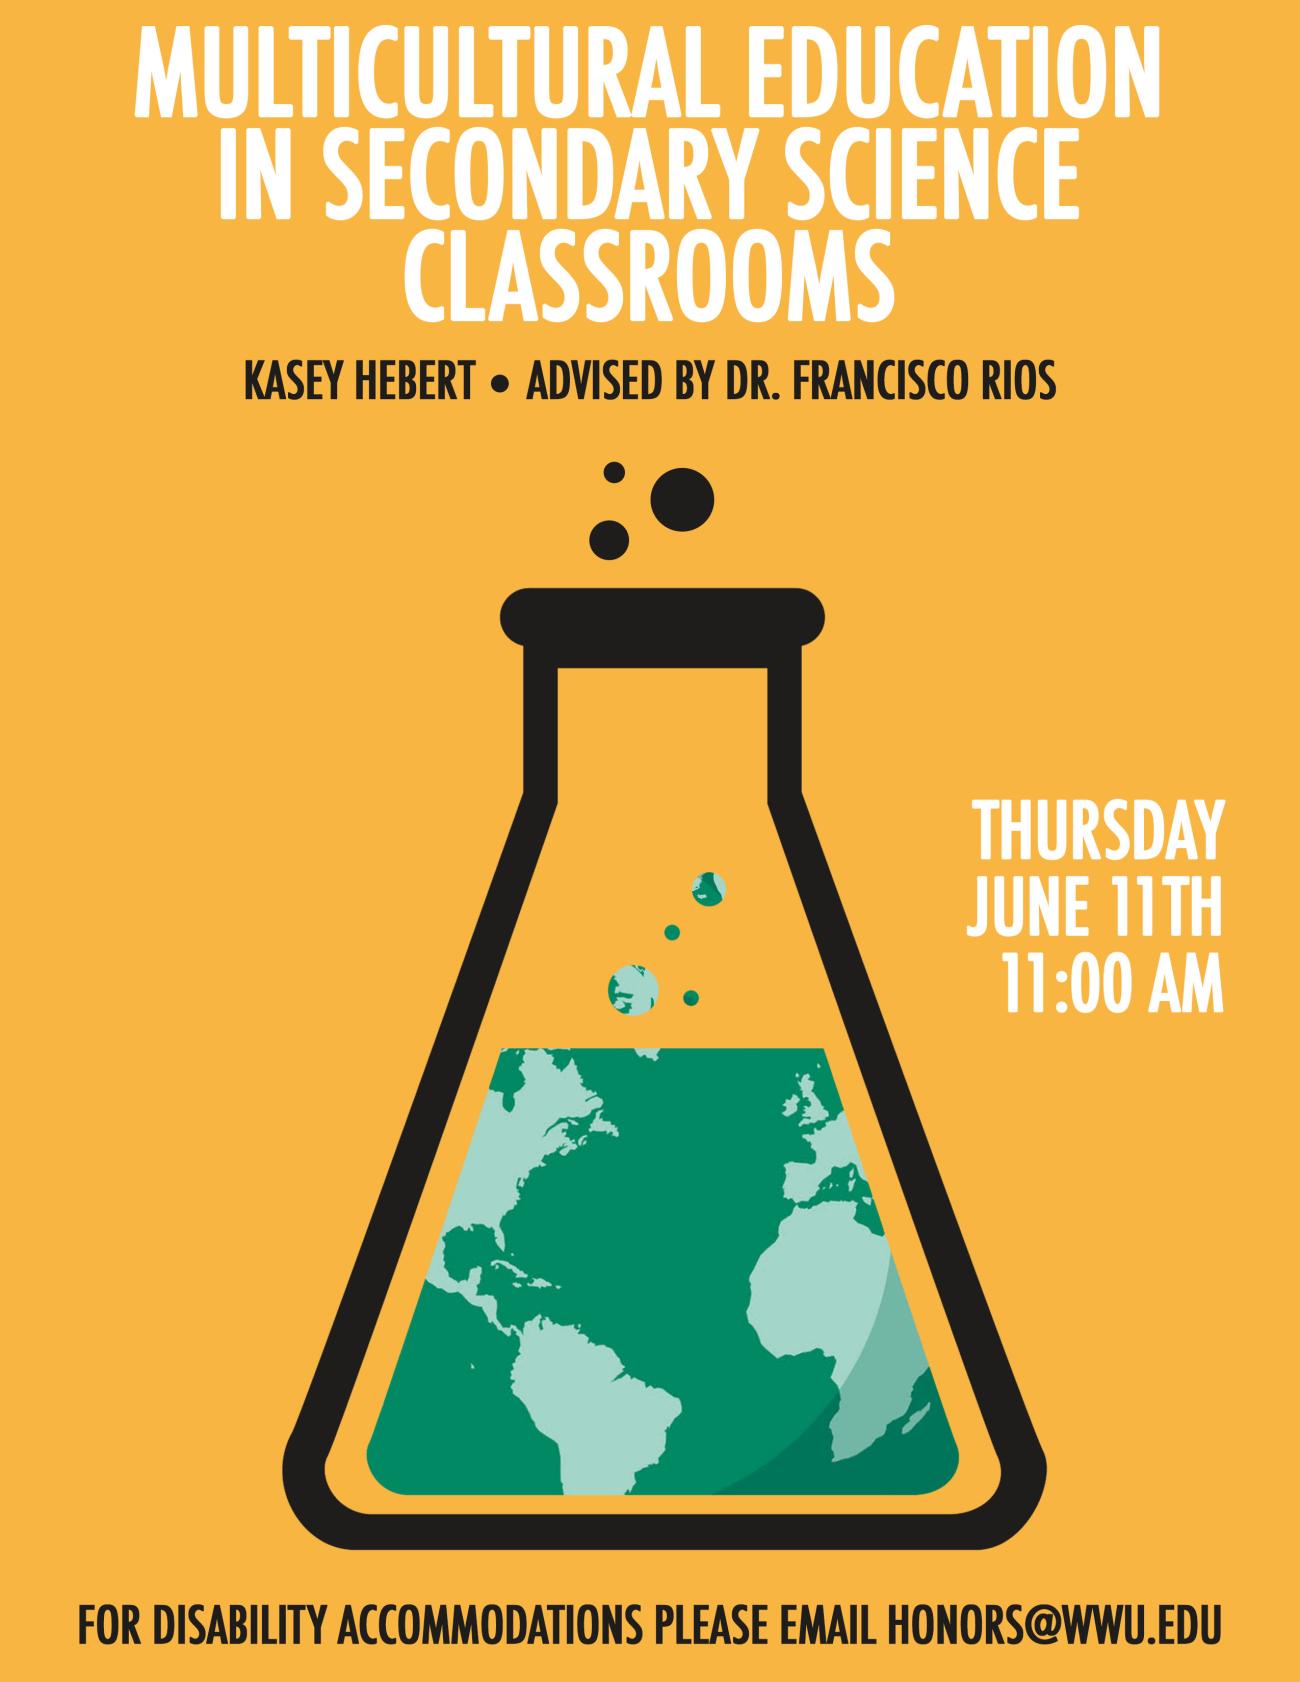 Image: Illustration of an Erlenmeyer flask filled with a world map. Text: "Multicultural Education in Secondary Science Classrooms"  "Kasey Hebert, Advised by Dr. Francisco Rios"  "Thursday, June 11th, 11:00 AM"  "For disability accommodations please email honors@wwu.edu"